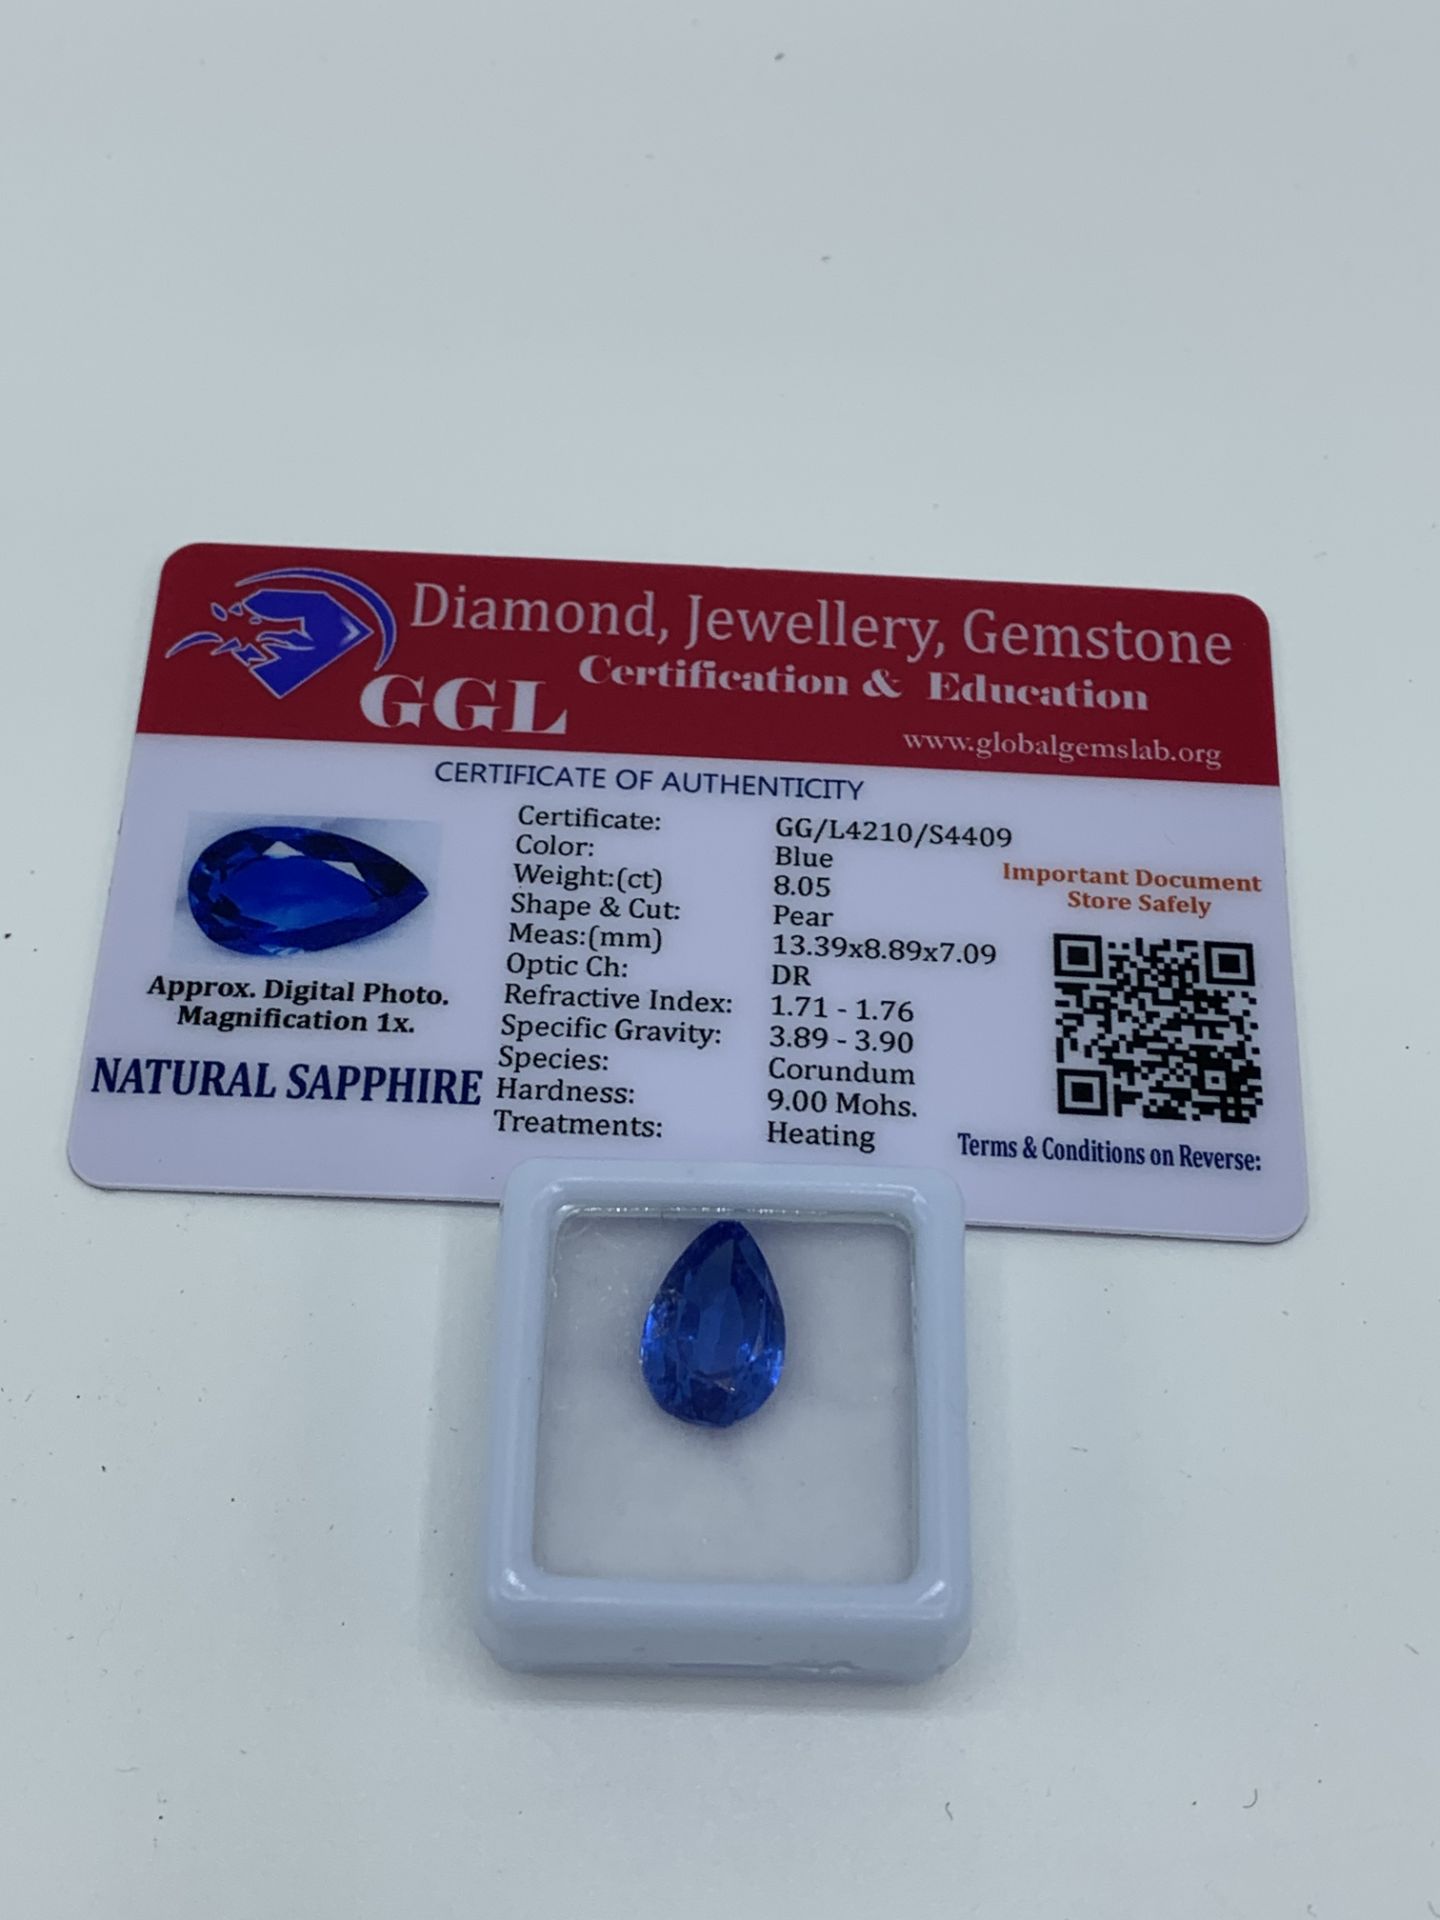 Pear cut blue sapphire, weight 8.05ct with certificate. Estimate £40-50.